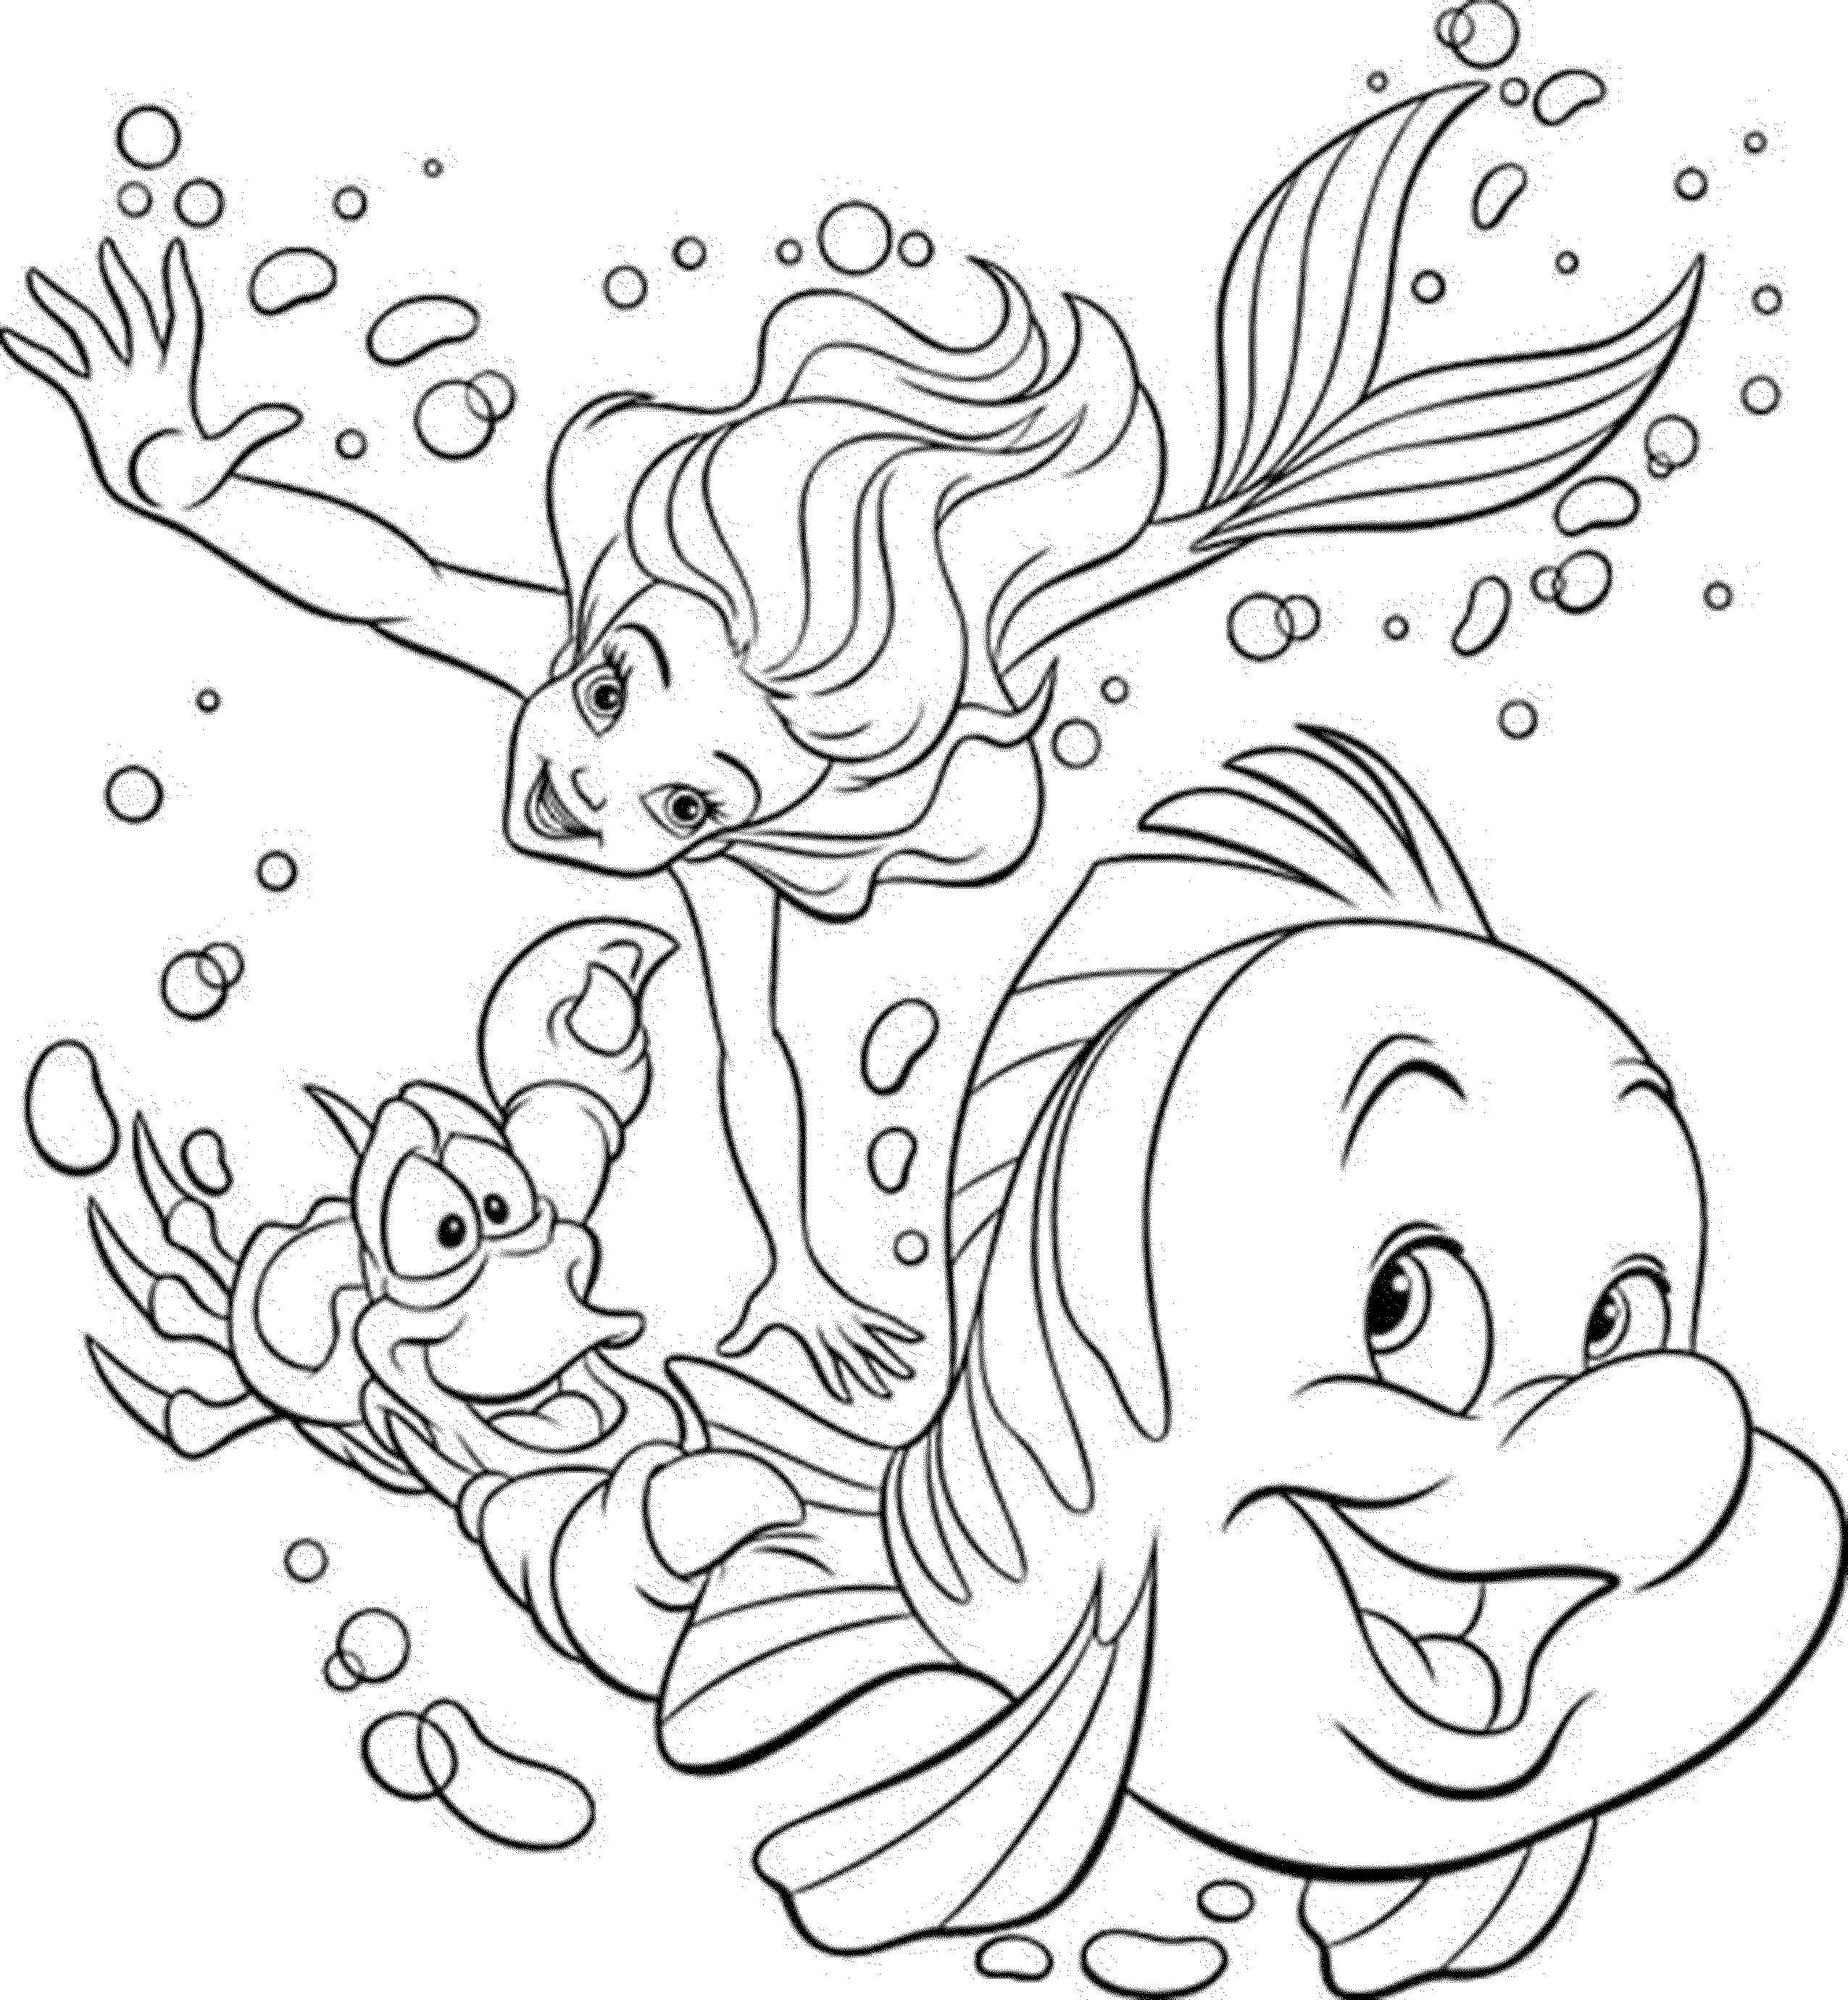 easy-printable-princess-coloring-pages-of-easy-printable-princess-coloring-pages Easy Printable Princess Coloring Pages Cartoon 